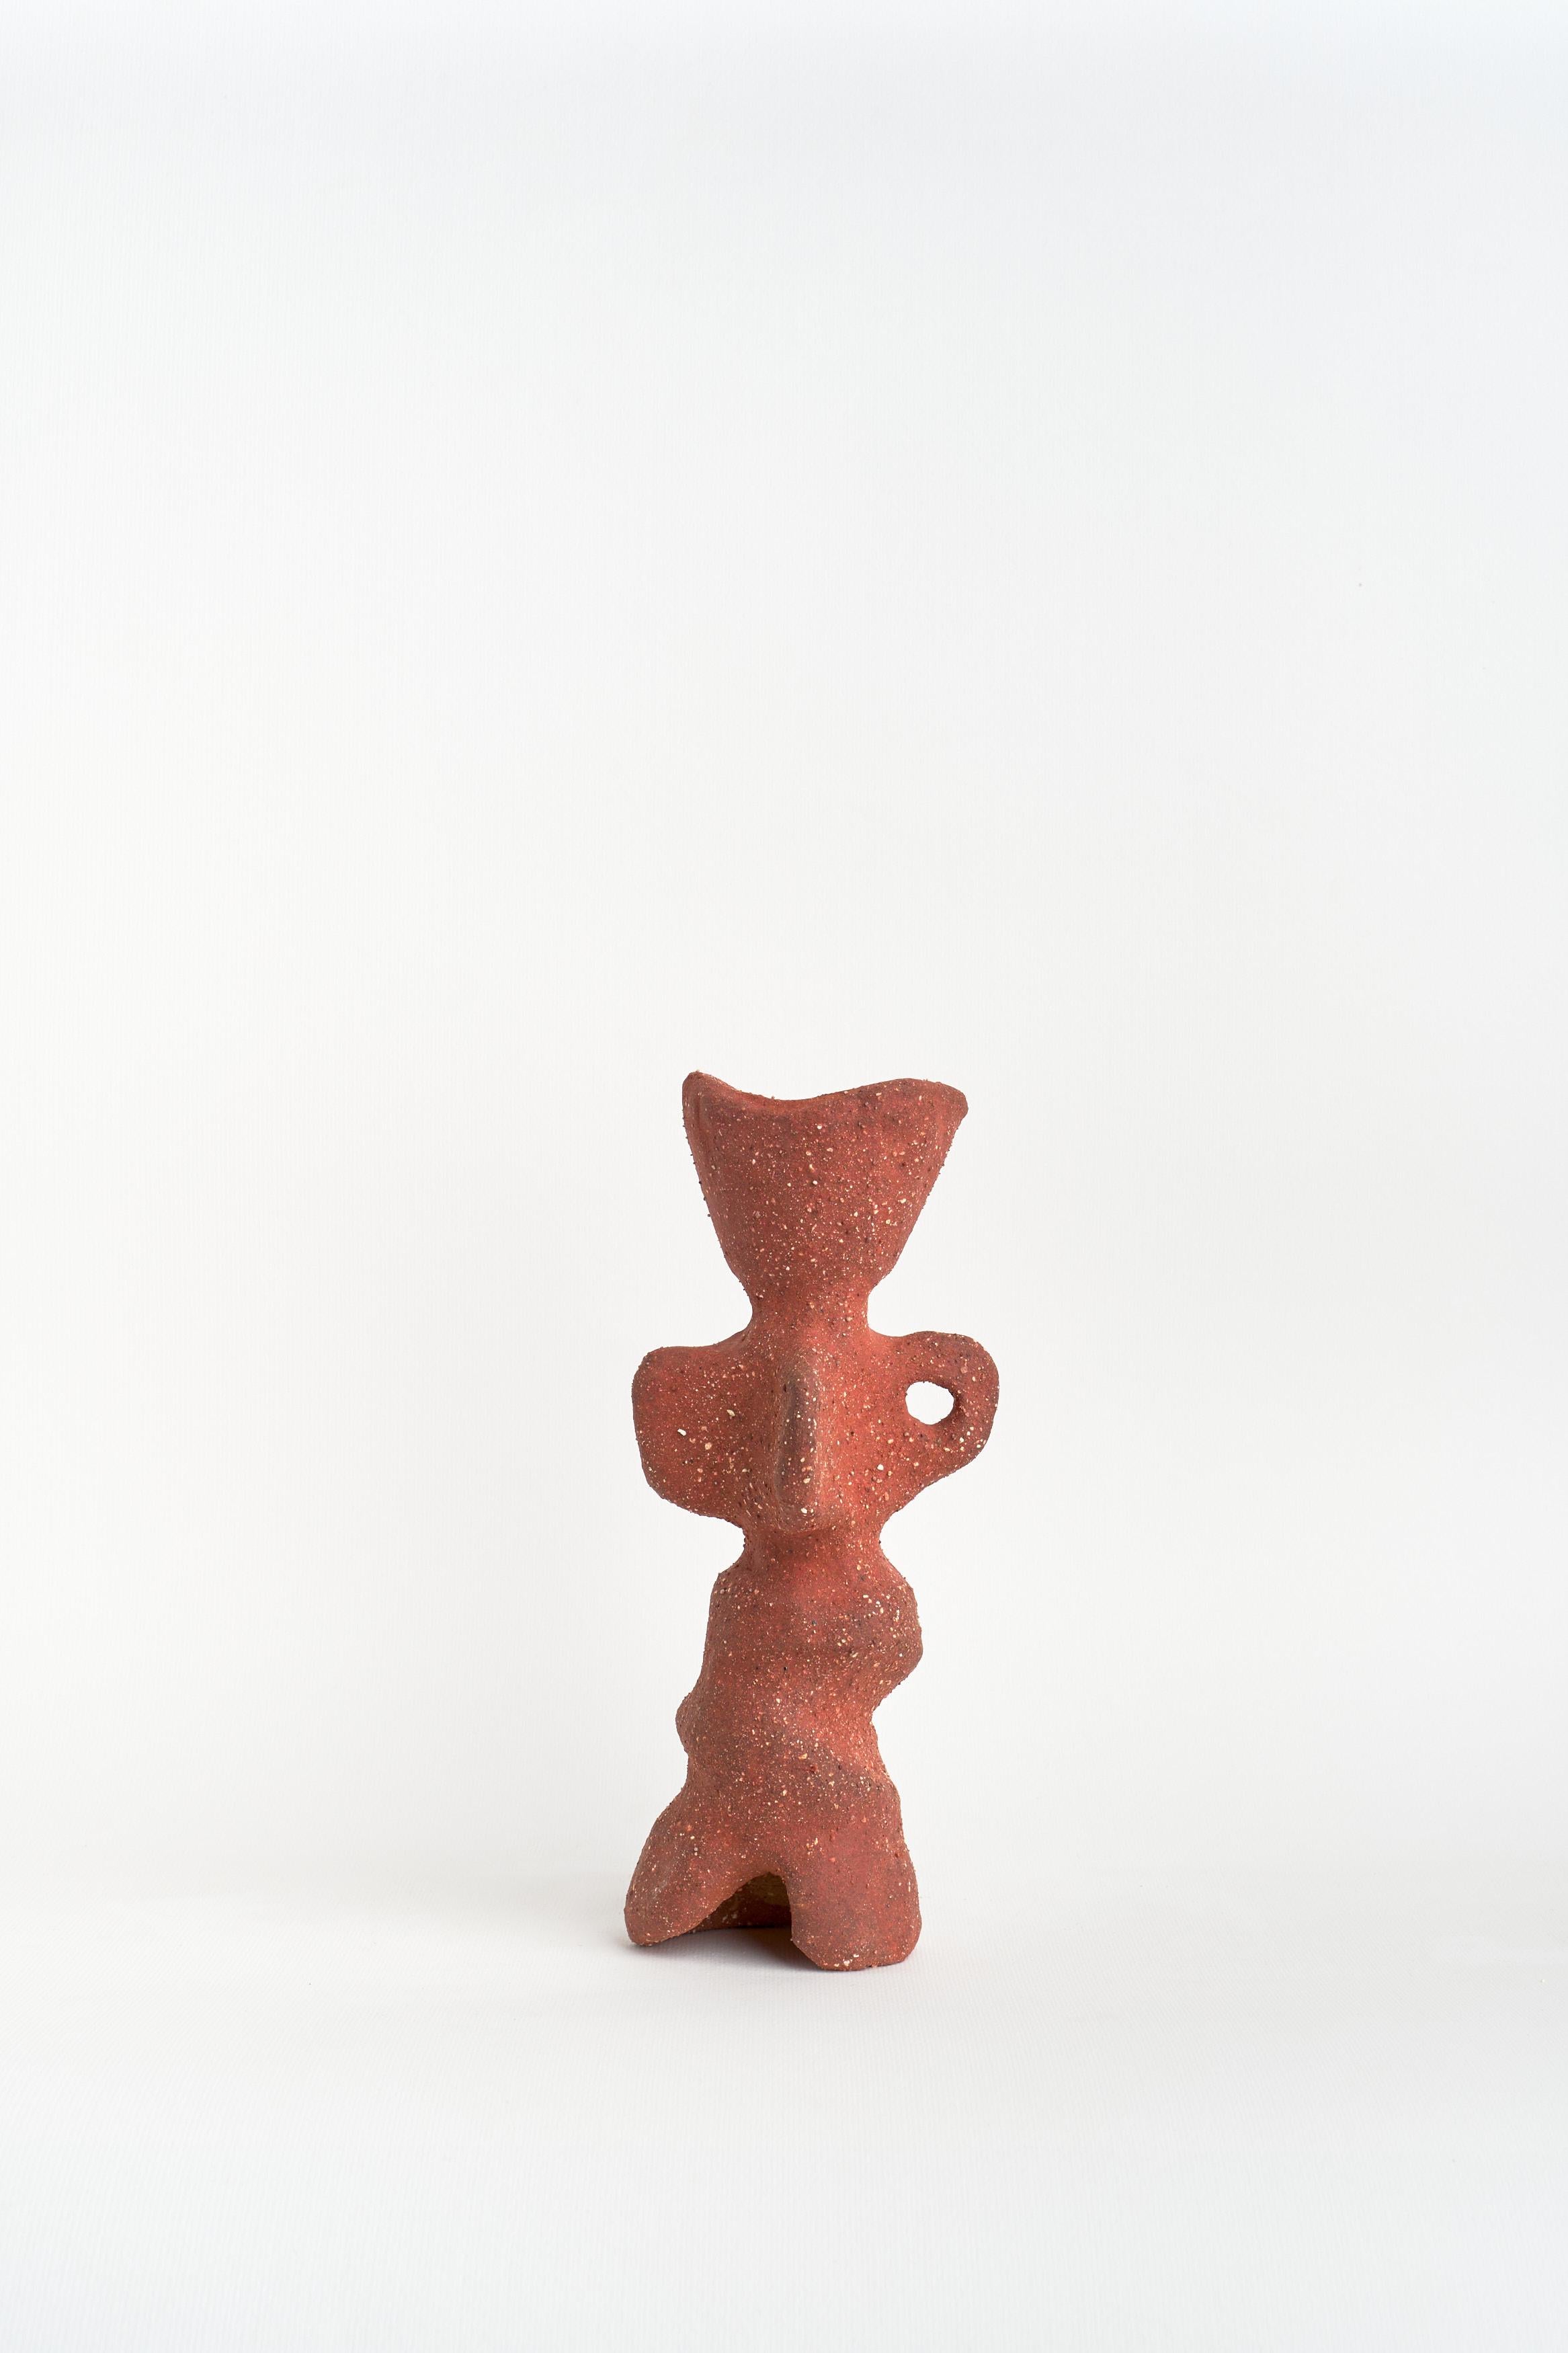 Candelabro 4 Candleholder by Camila Apaez
Unique
Materials: Stoneware, Red Clay
Dimensions: ⌀ 7 x H 20 cm

Ila Ceramica emerged from a process of inner inquiry where ceramics became a space for presence, silence, touch and patience. Camila